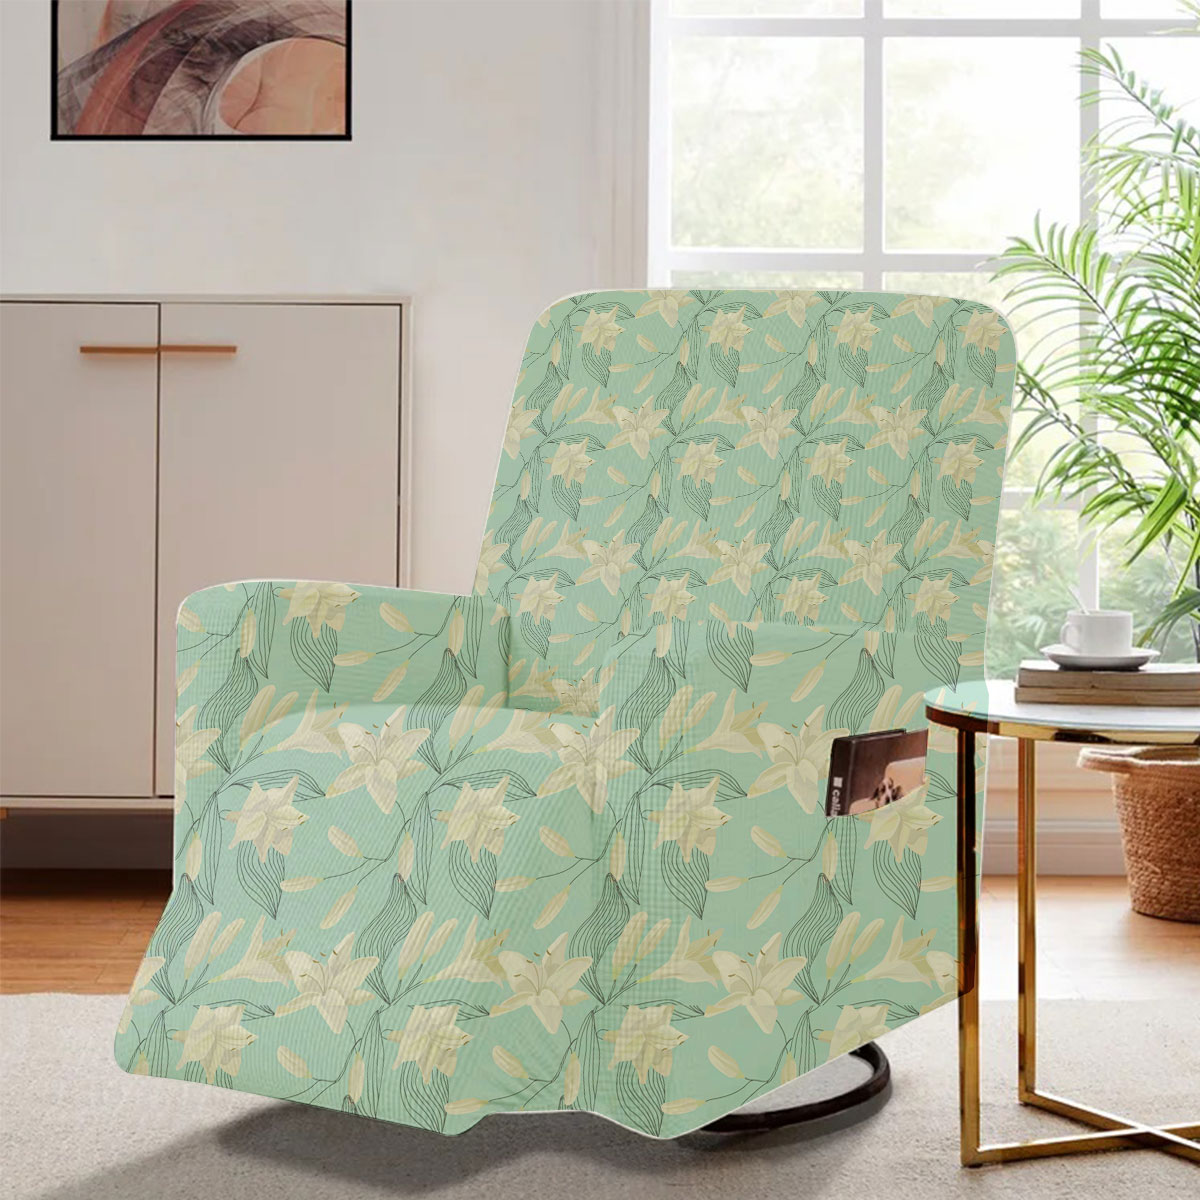 Tropical Lily FLowers Recliner Slipcover